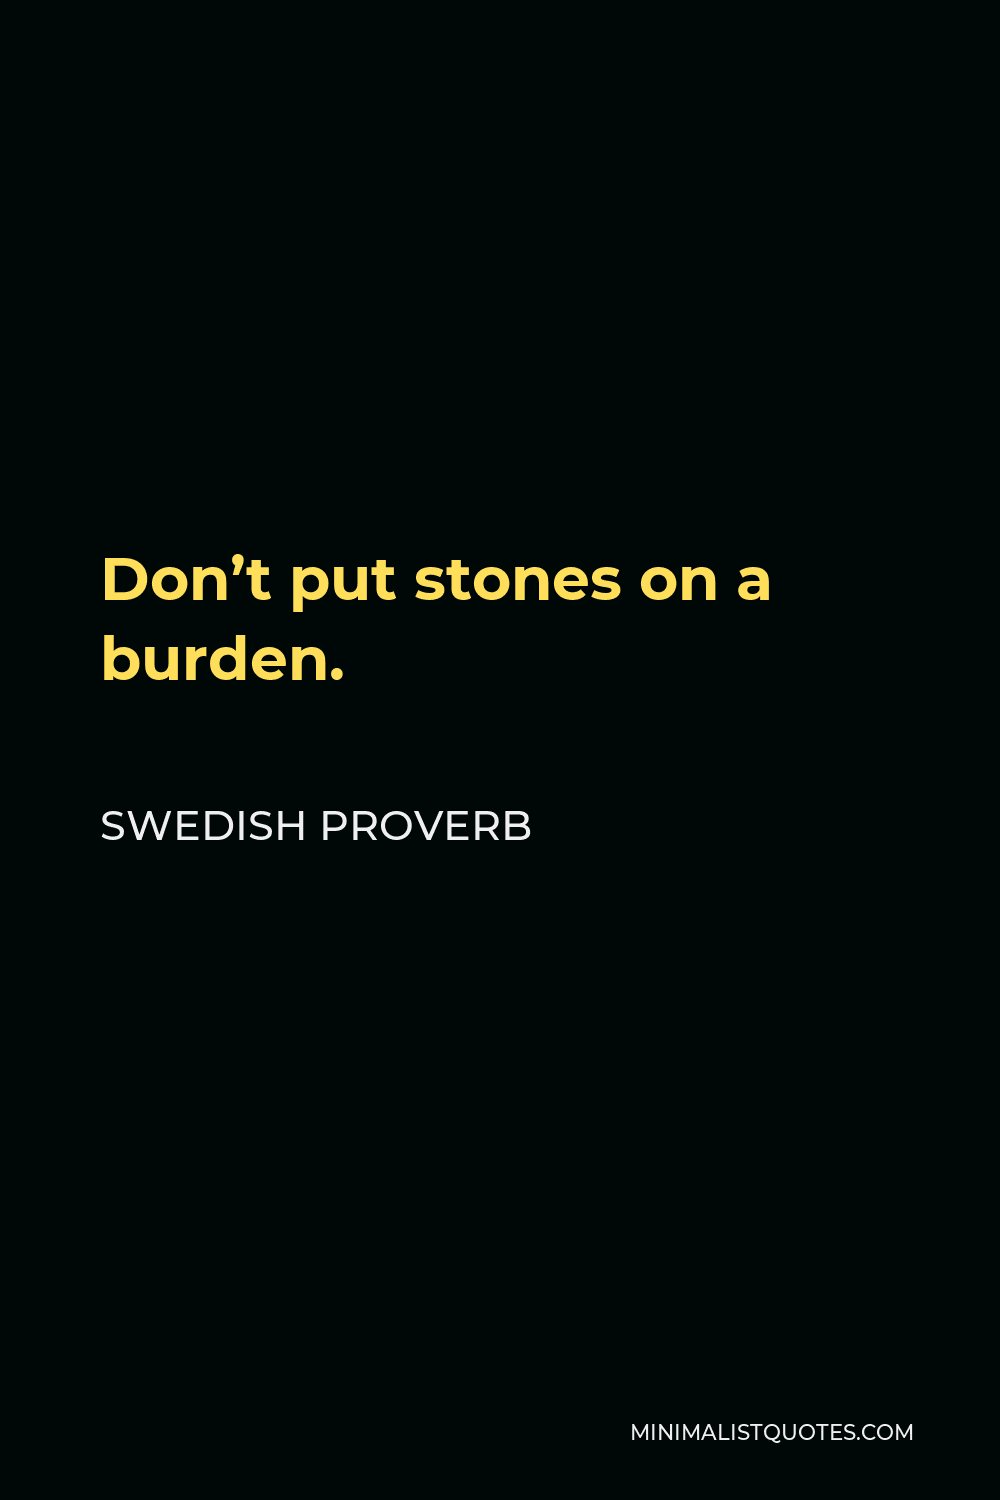 Swedish Proverb Quote - Don’t put stones on a burden.